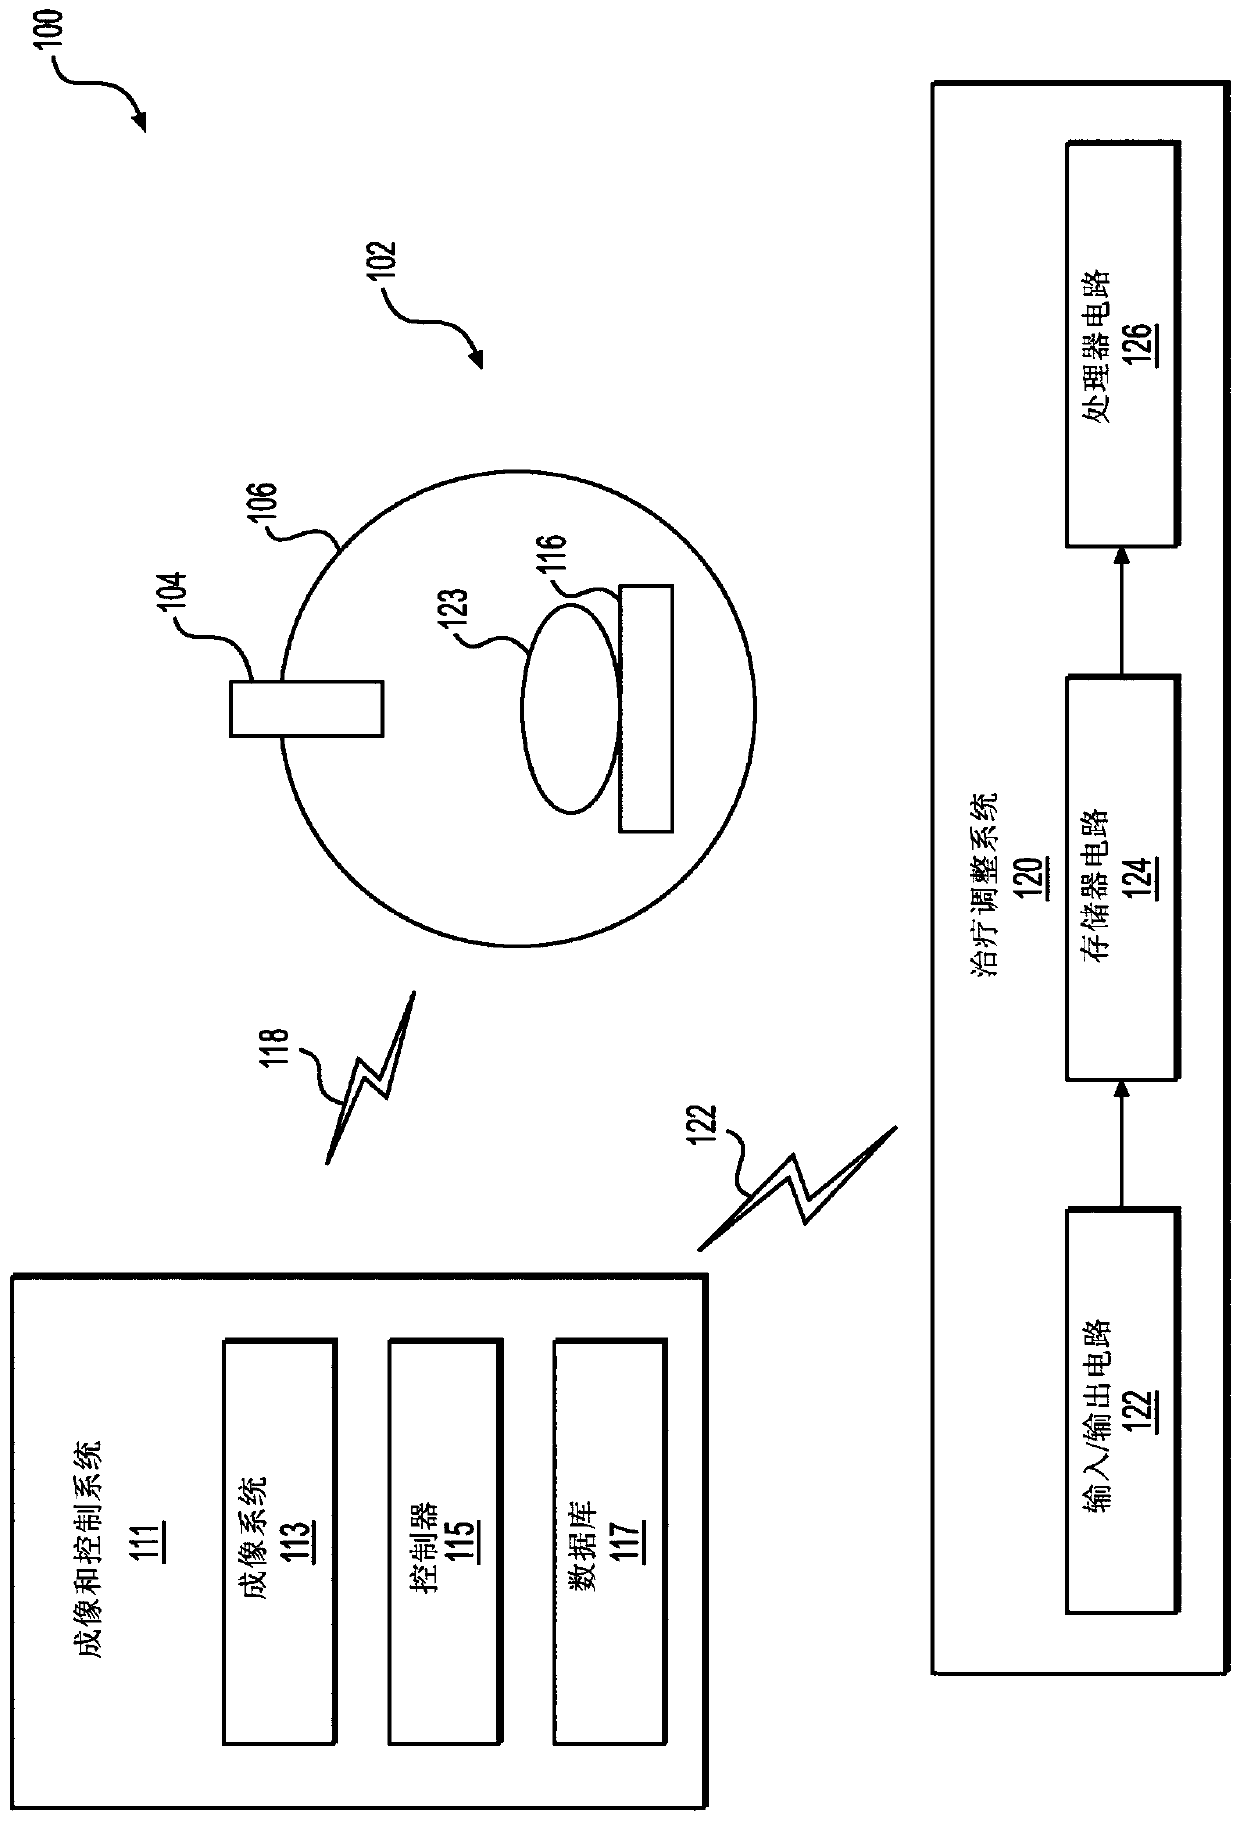 Systems and methods for real-time imaging